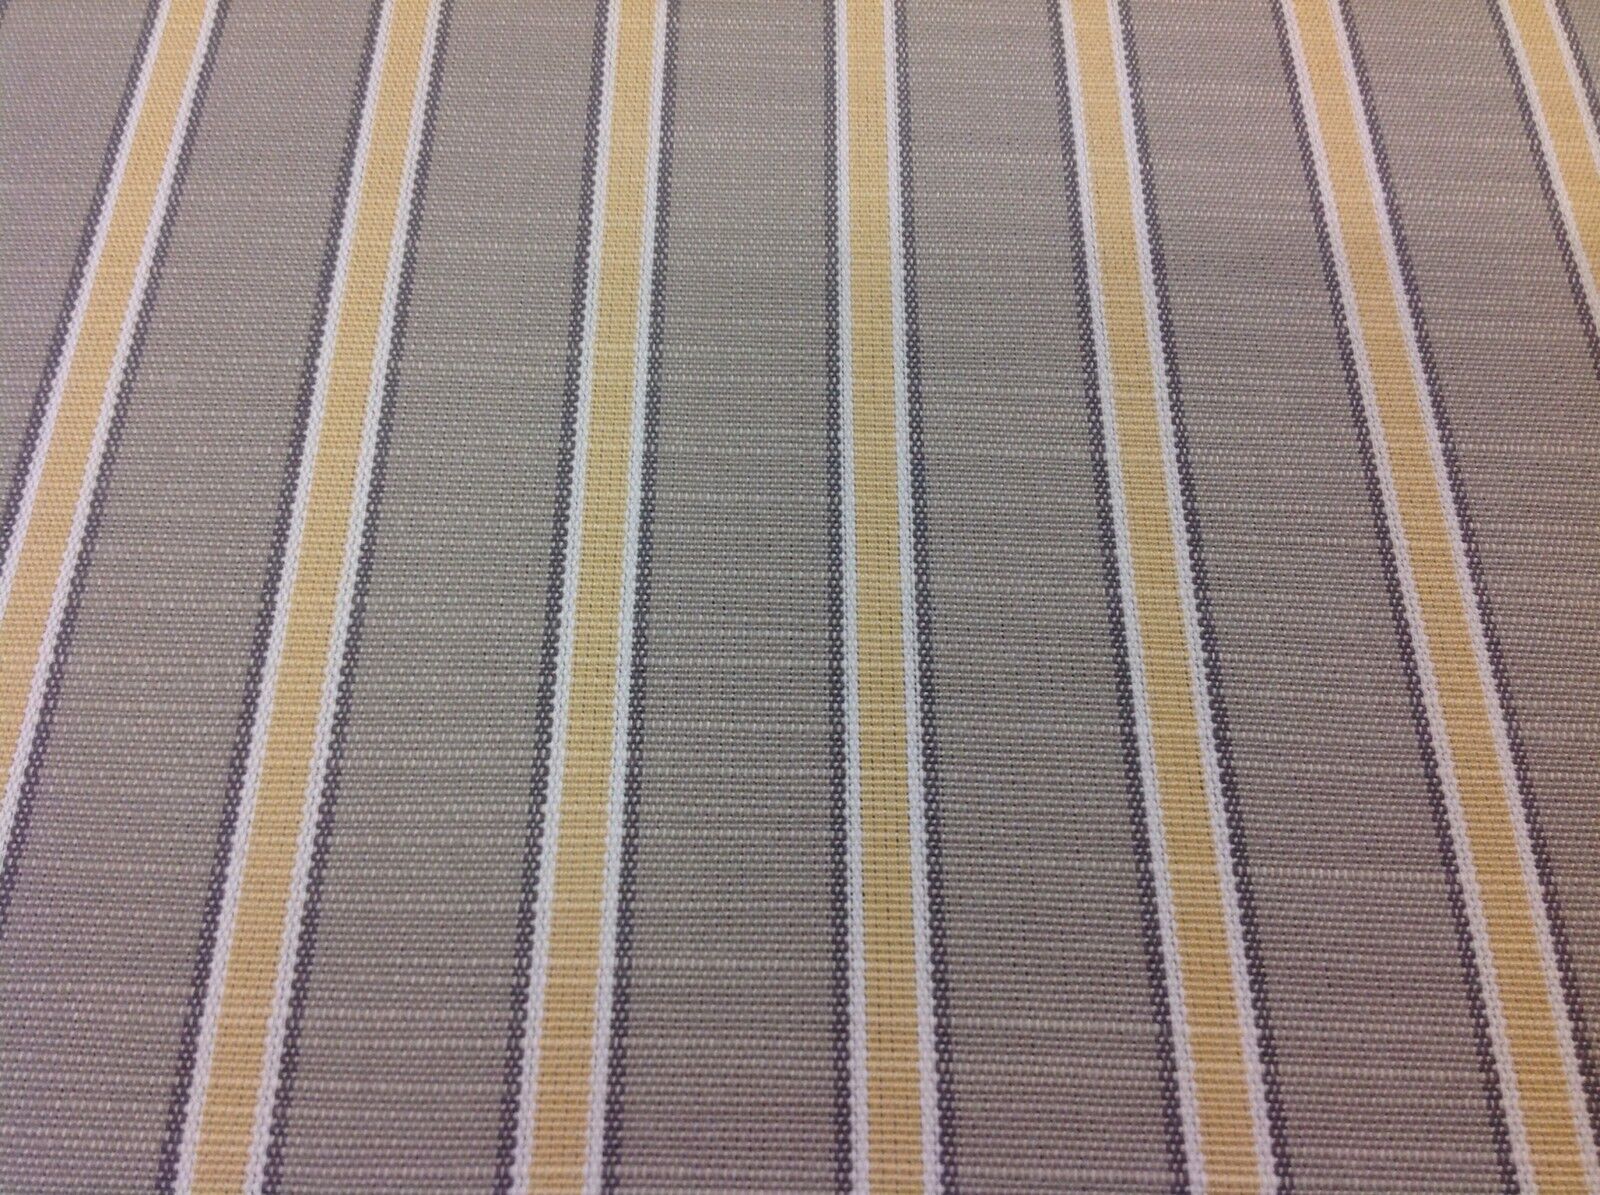 Clarence House Outdoor Upholstery Fabric Sans Souci Stripe/Yellow (34753-2) 7.1Y